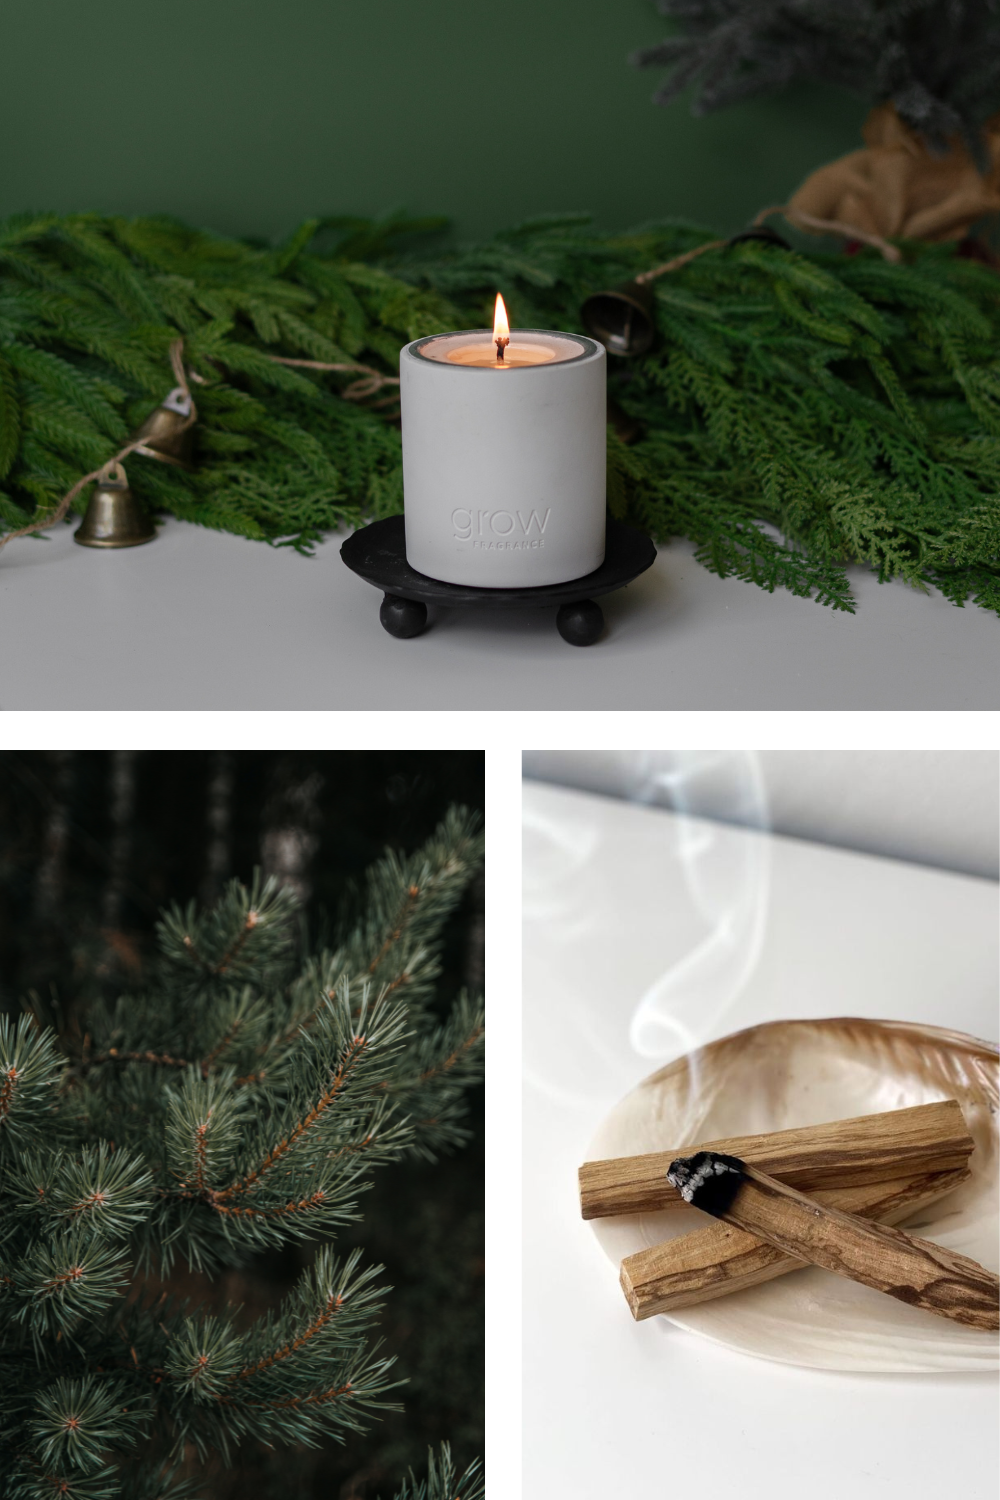 Non-Toxic Palo Santo Pine Candle: Discover the Tranquil Fragrance of Palo Santo and Crisp Pine Needles - Perfect for Cozy Winter Evenings by the Fireplace